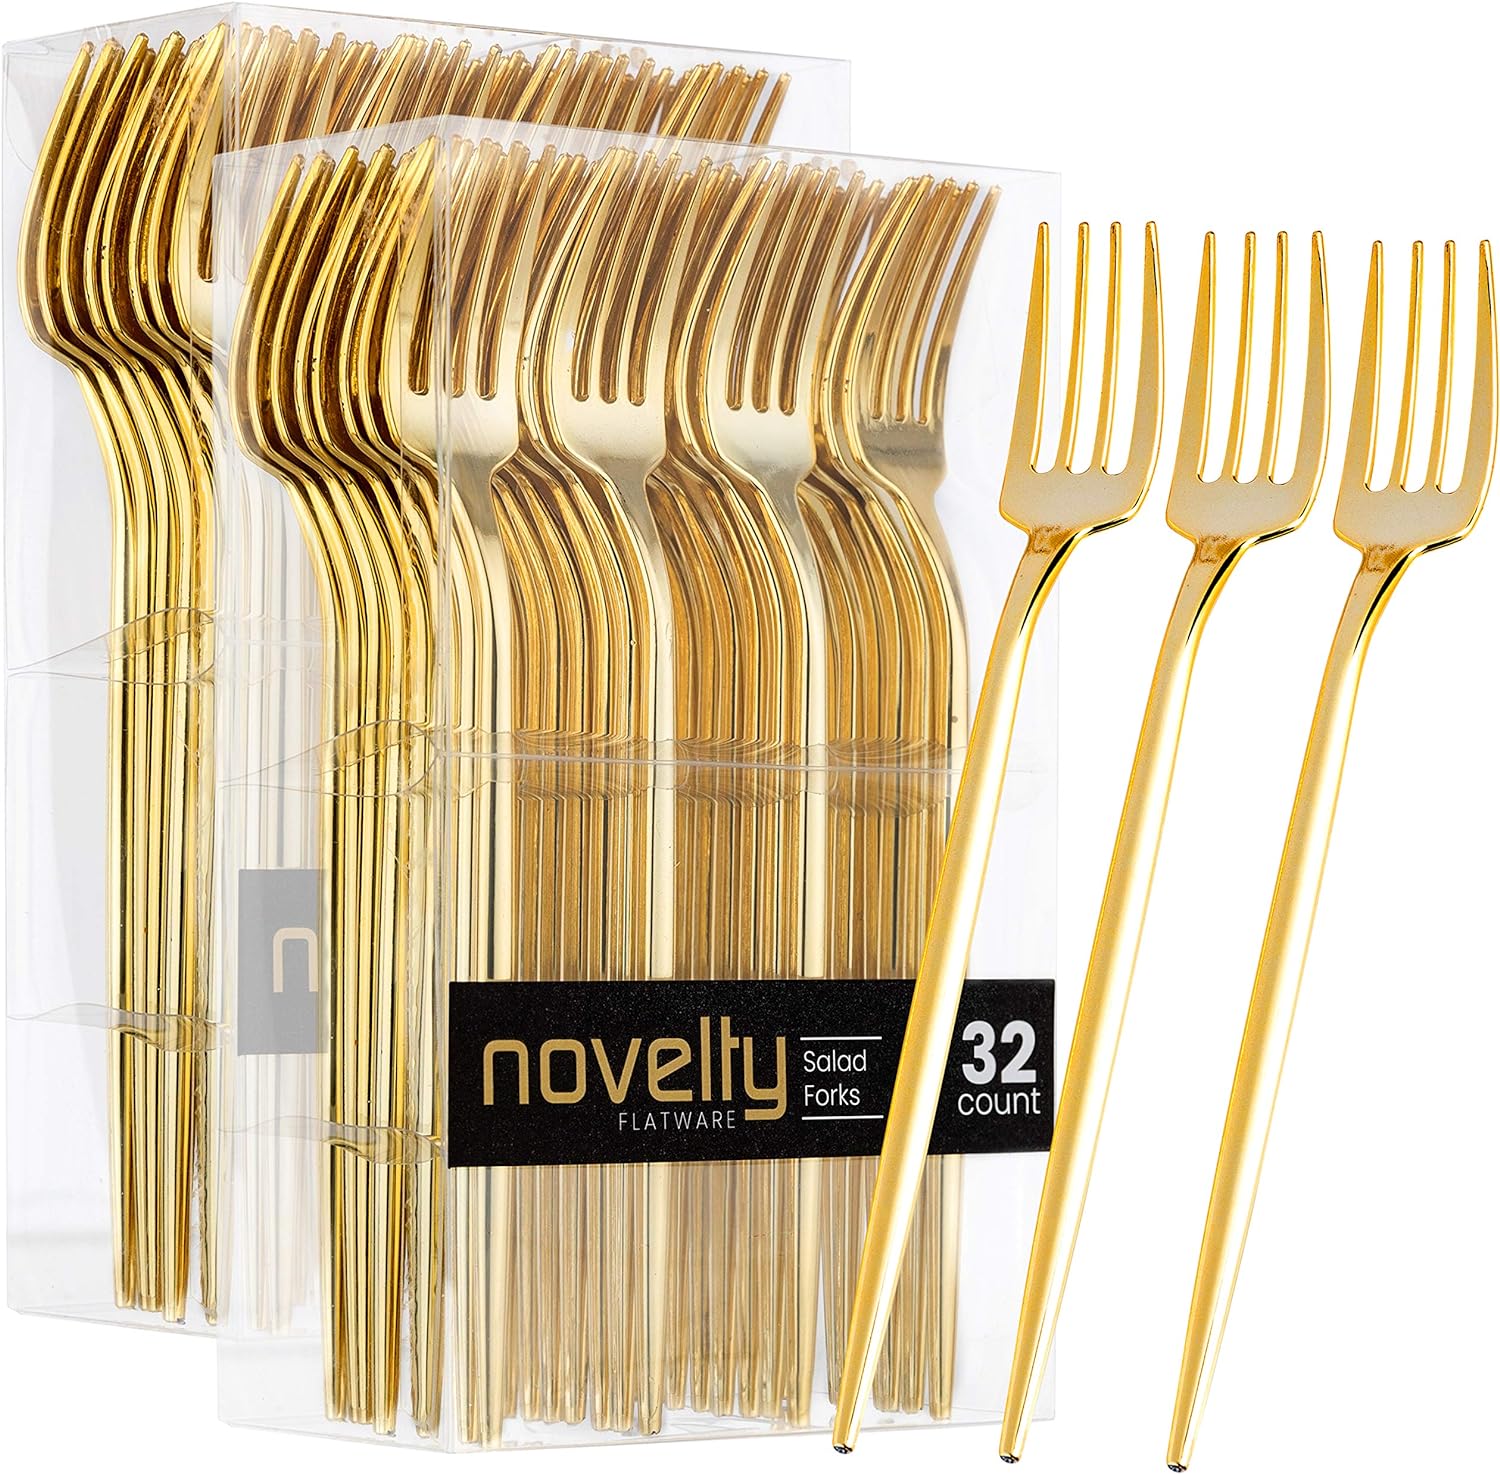 Novelty Modern Flatware, Cutlery, Disposable Plastic Salad forks Luxury Gold 64 Count